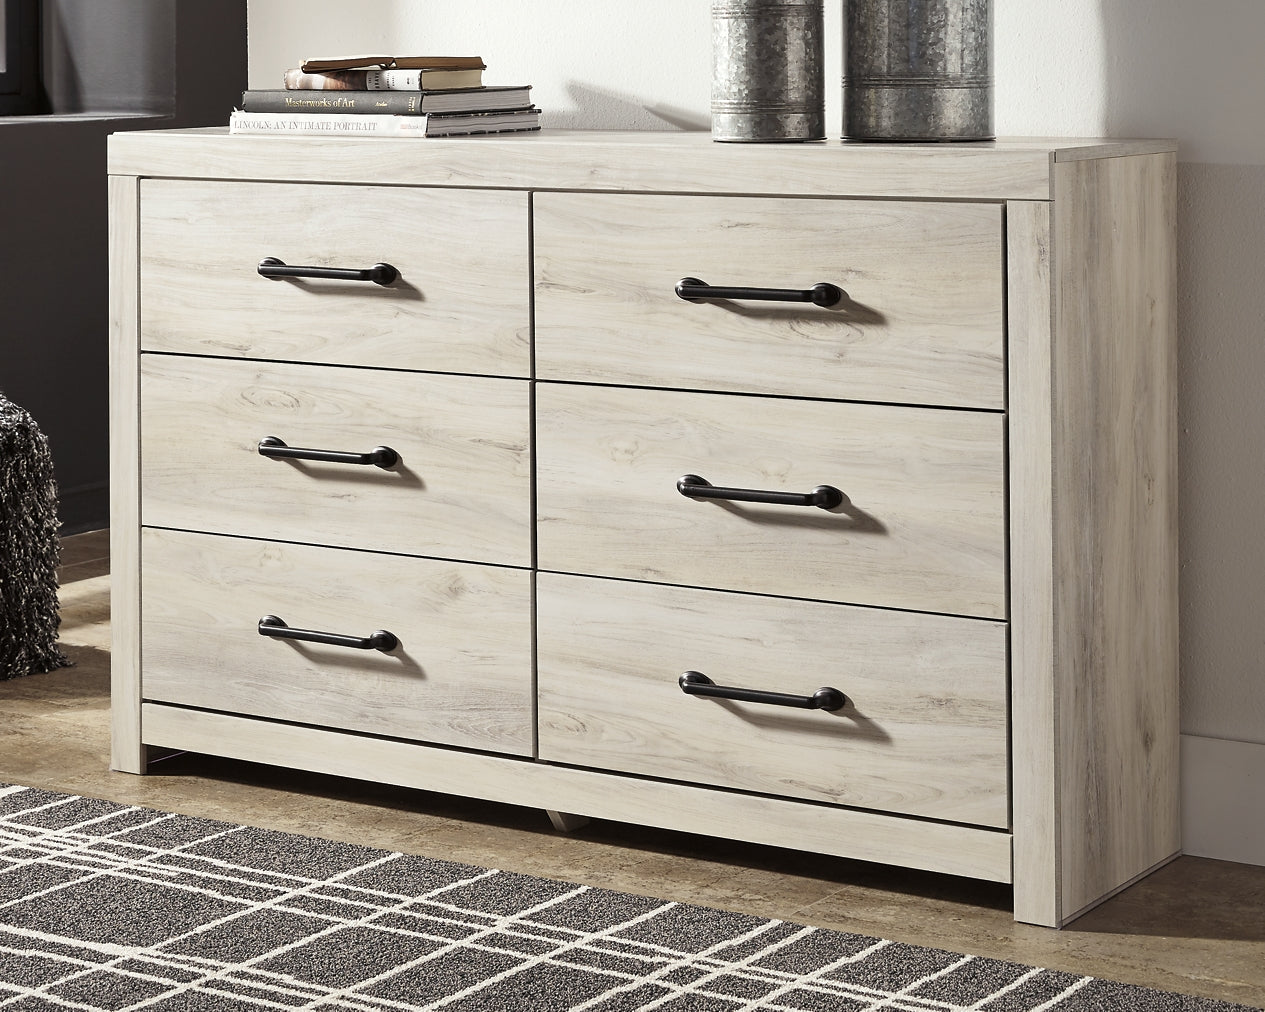 Cambeck Six Drawer Dresser at Walker Mattress and Furniture Locations in Cedar Park and Belton TX.